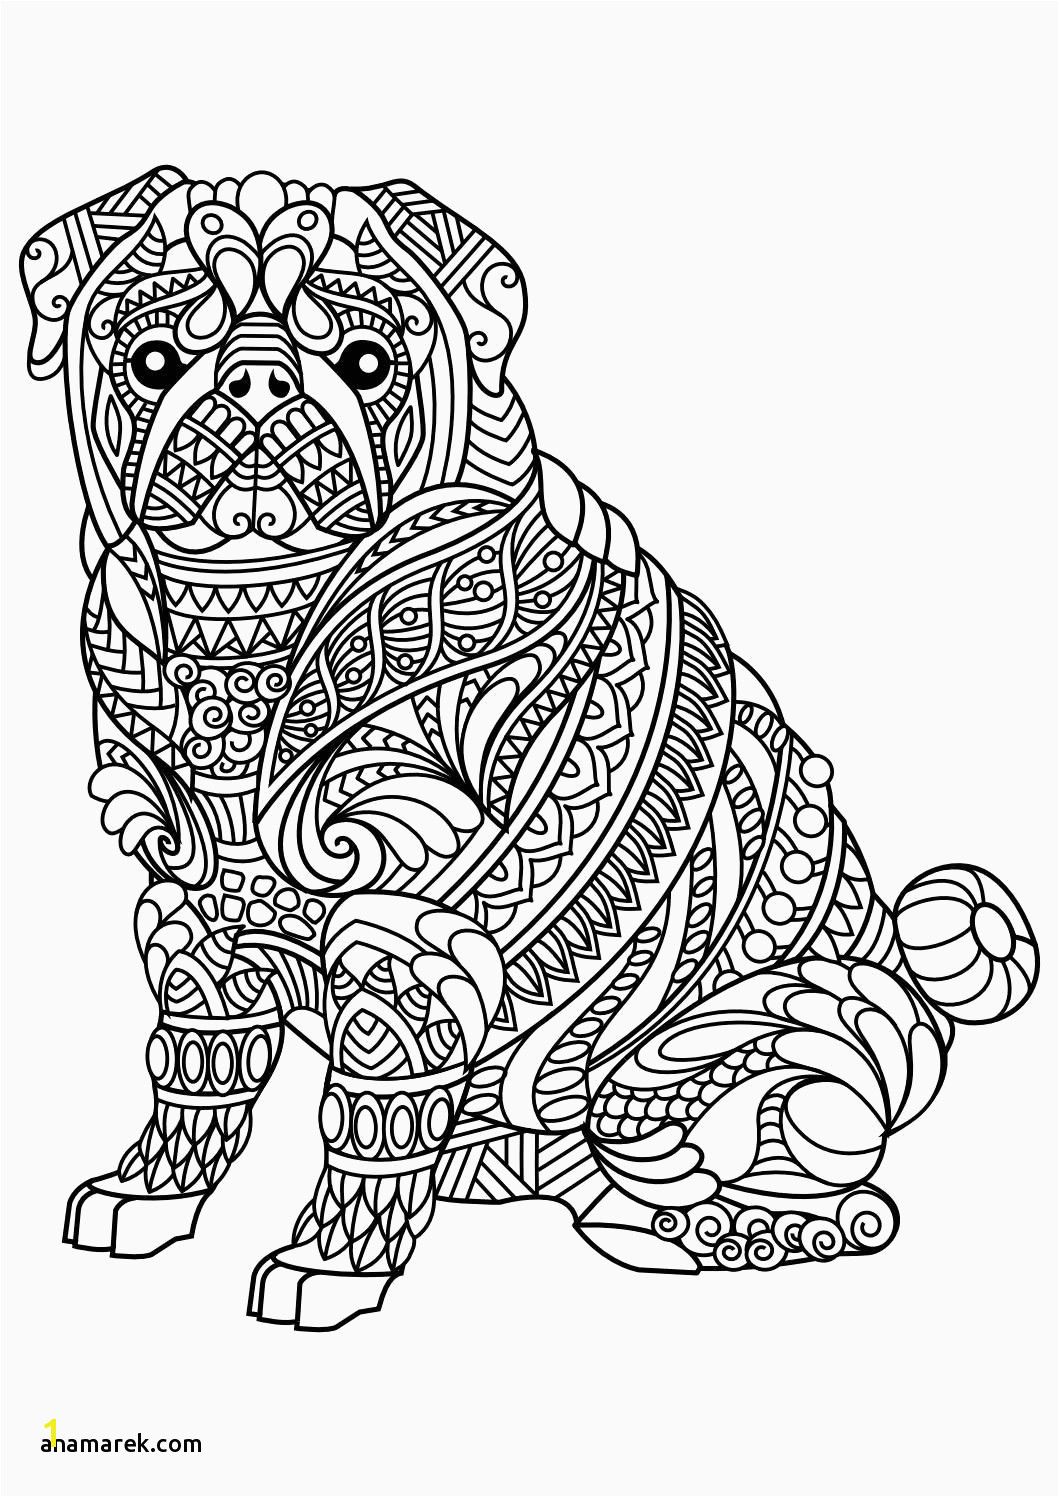 Printable Dog Coloring Pages Coole Wolf Bilder Schön Fresh Printable Dog Coloring Pages Beautiful